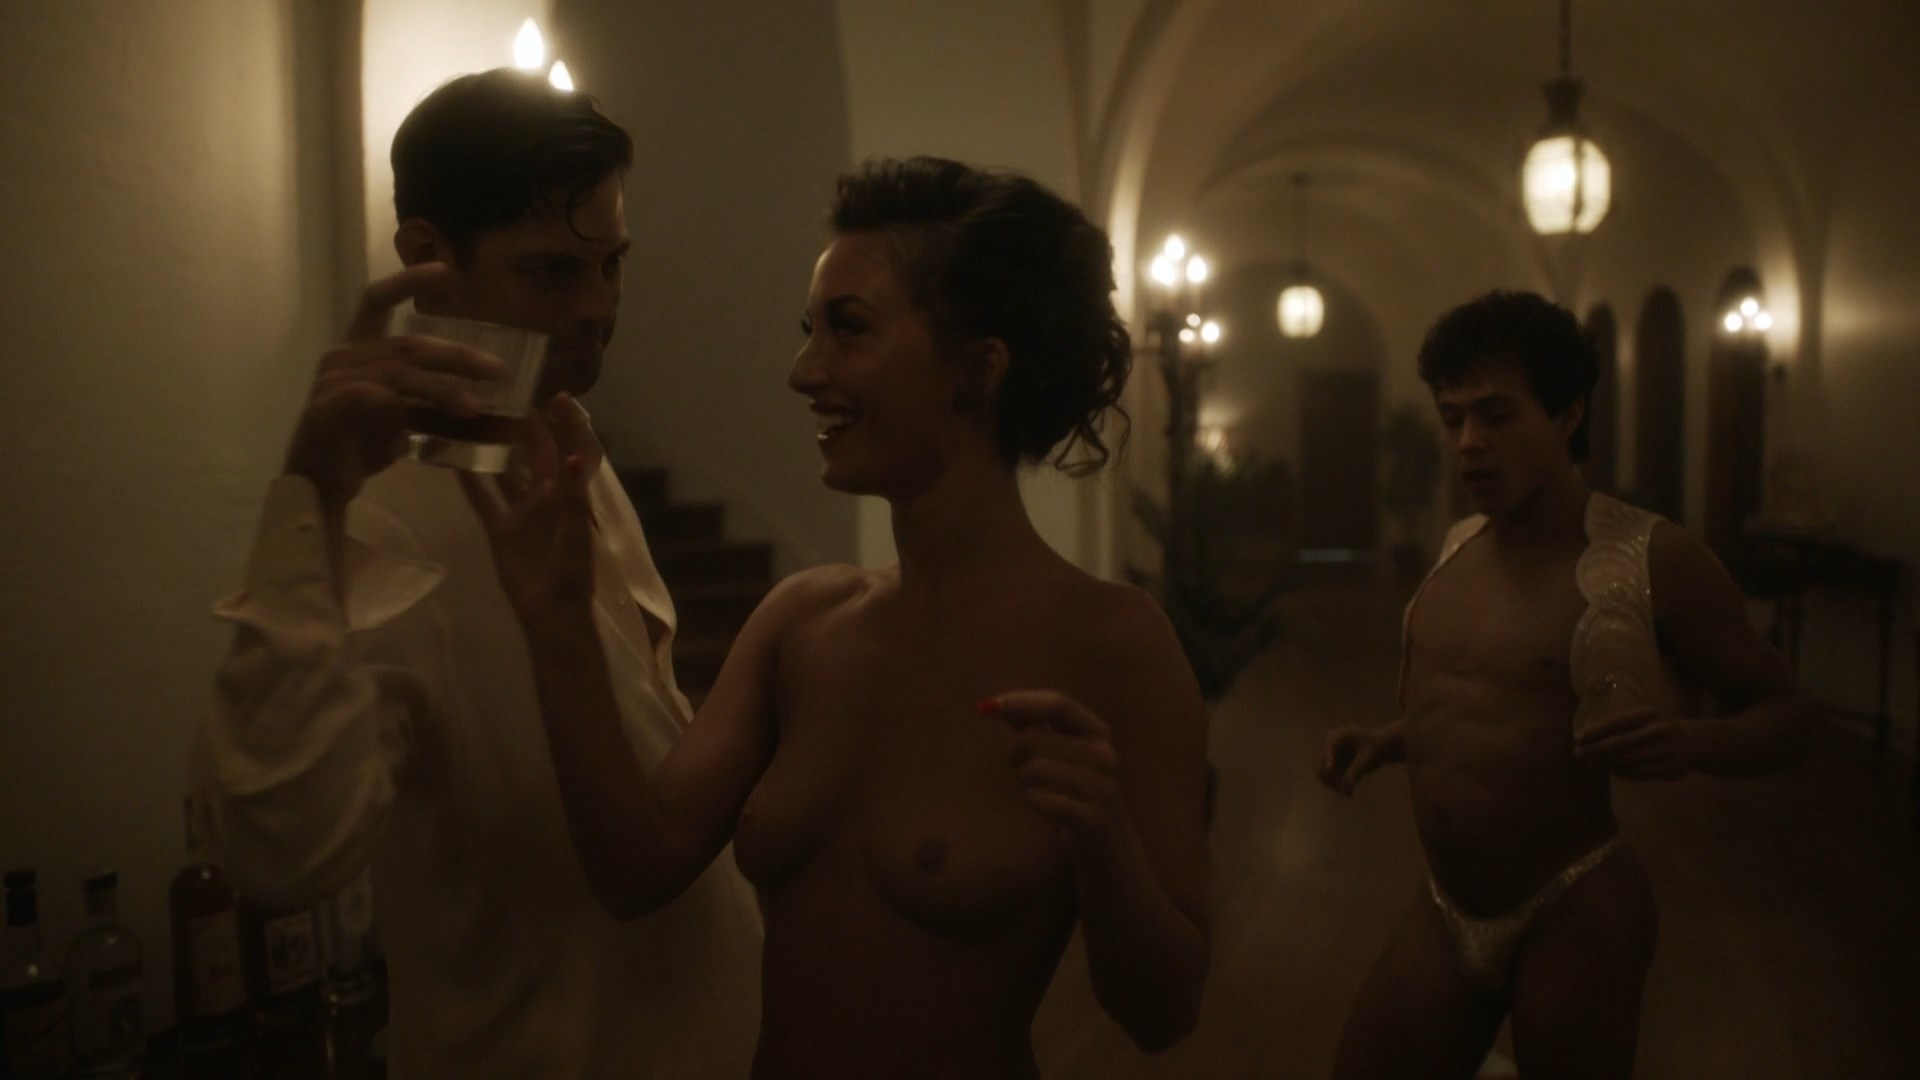 In nudity the man the high castle Parent reviews